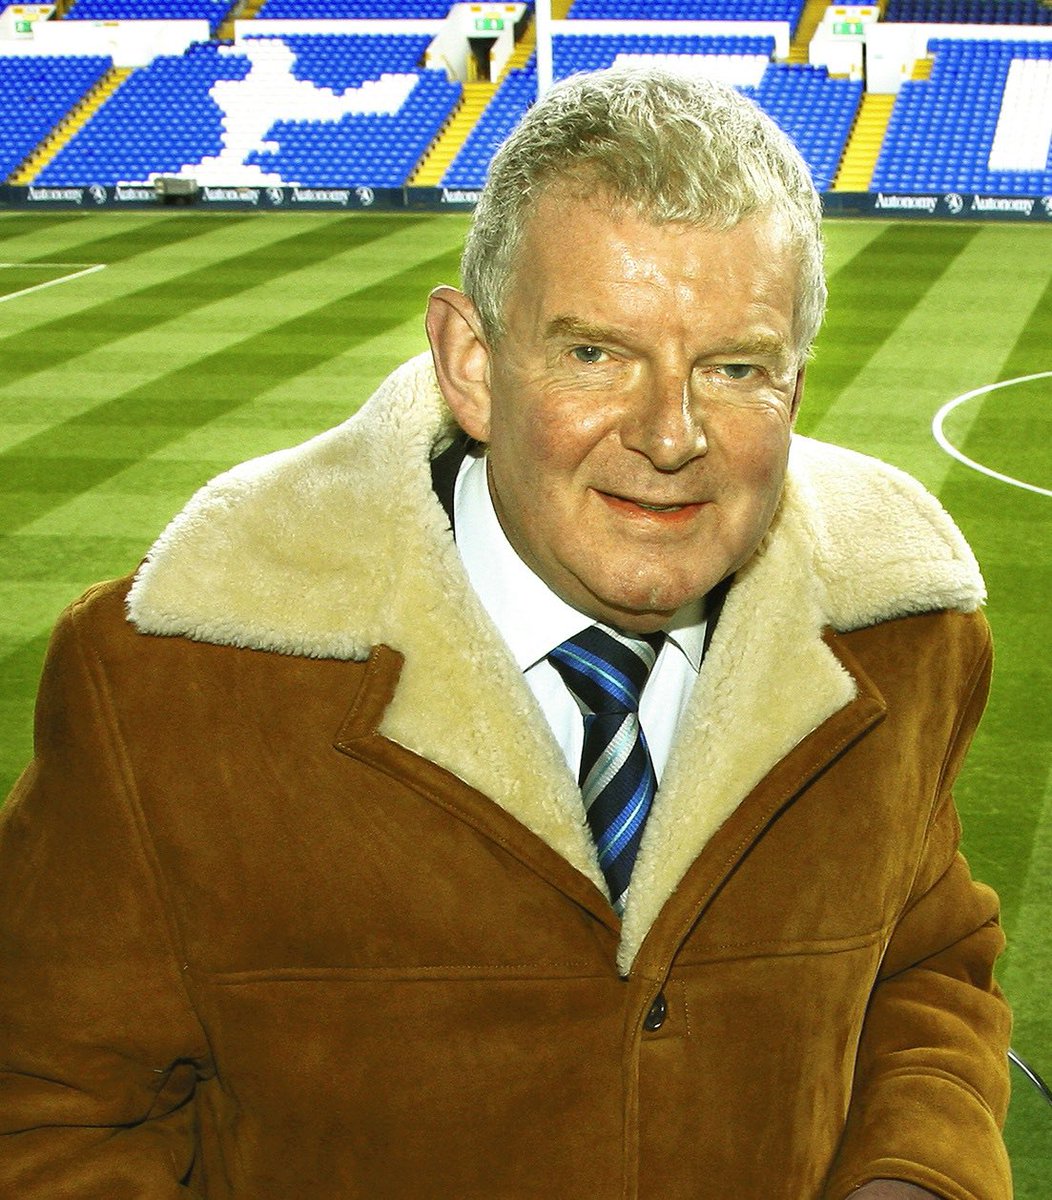 We are all deeply saddened to hear of the passing of John Motson. We had the absolute pleasure and privilege of working with John, when he became the voice of our Subbuteo campaign. He will be greatly missed, and our thoughts are with his family and friends at this time